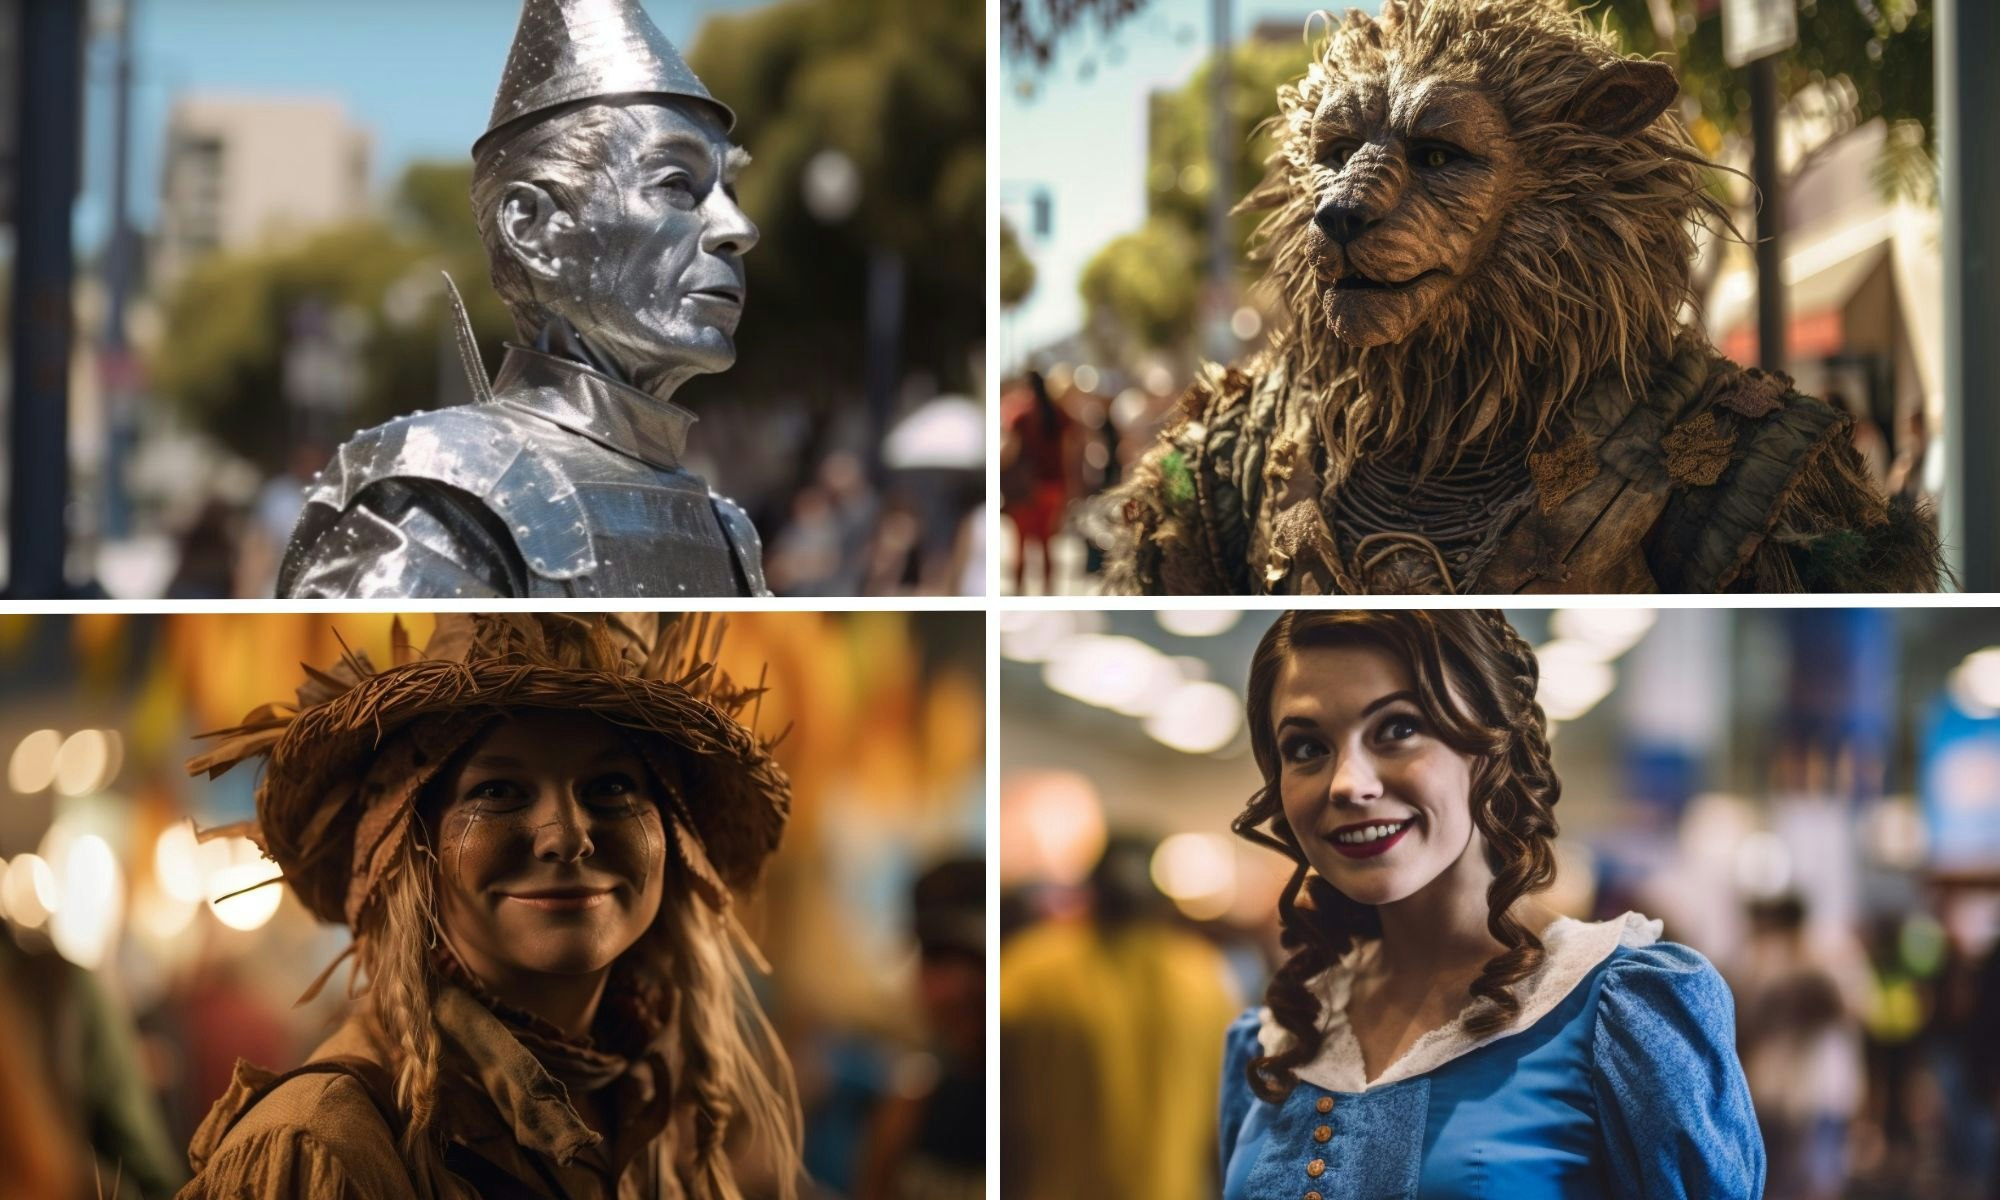 The Wizard of Oz Experience in Launceston